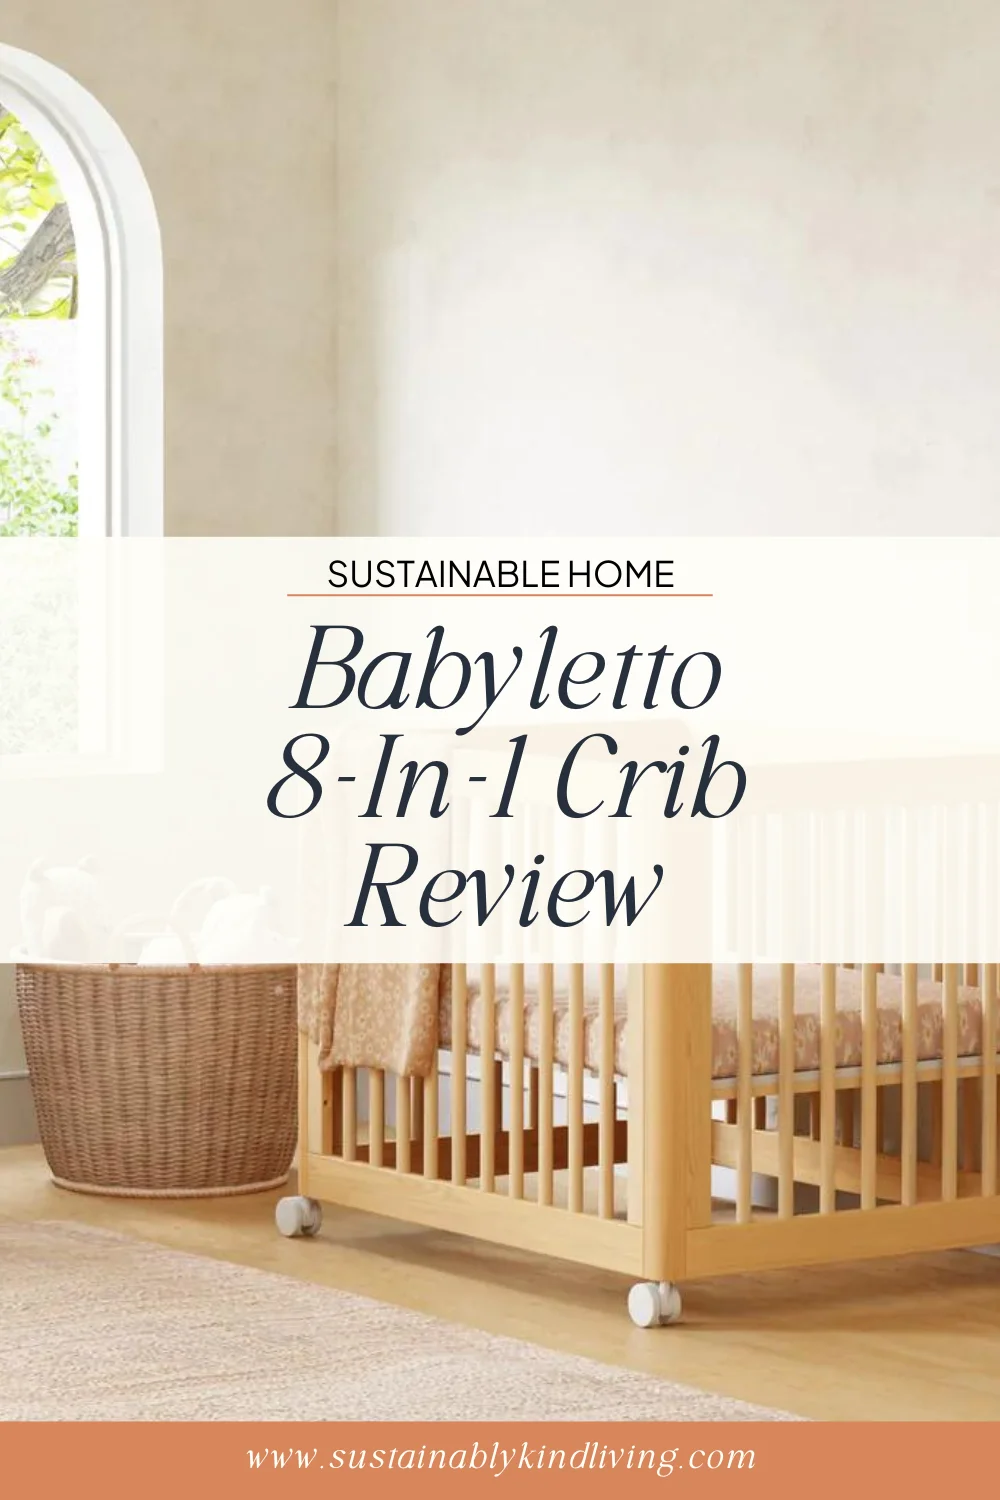 Babyletto 8-in-1 crib full review